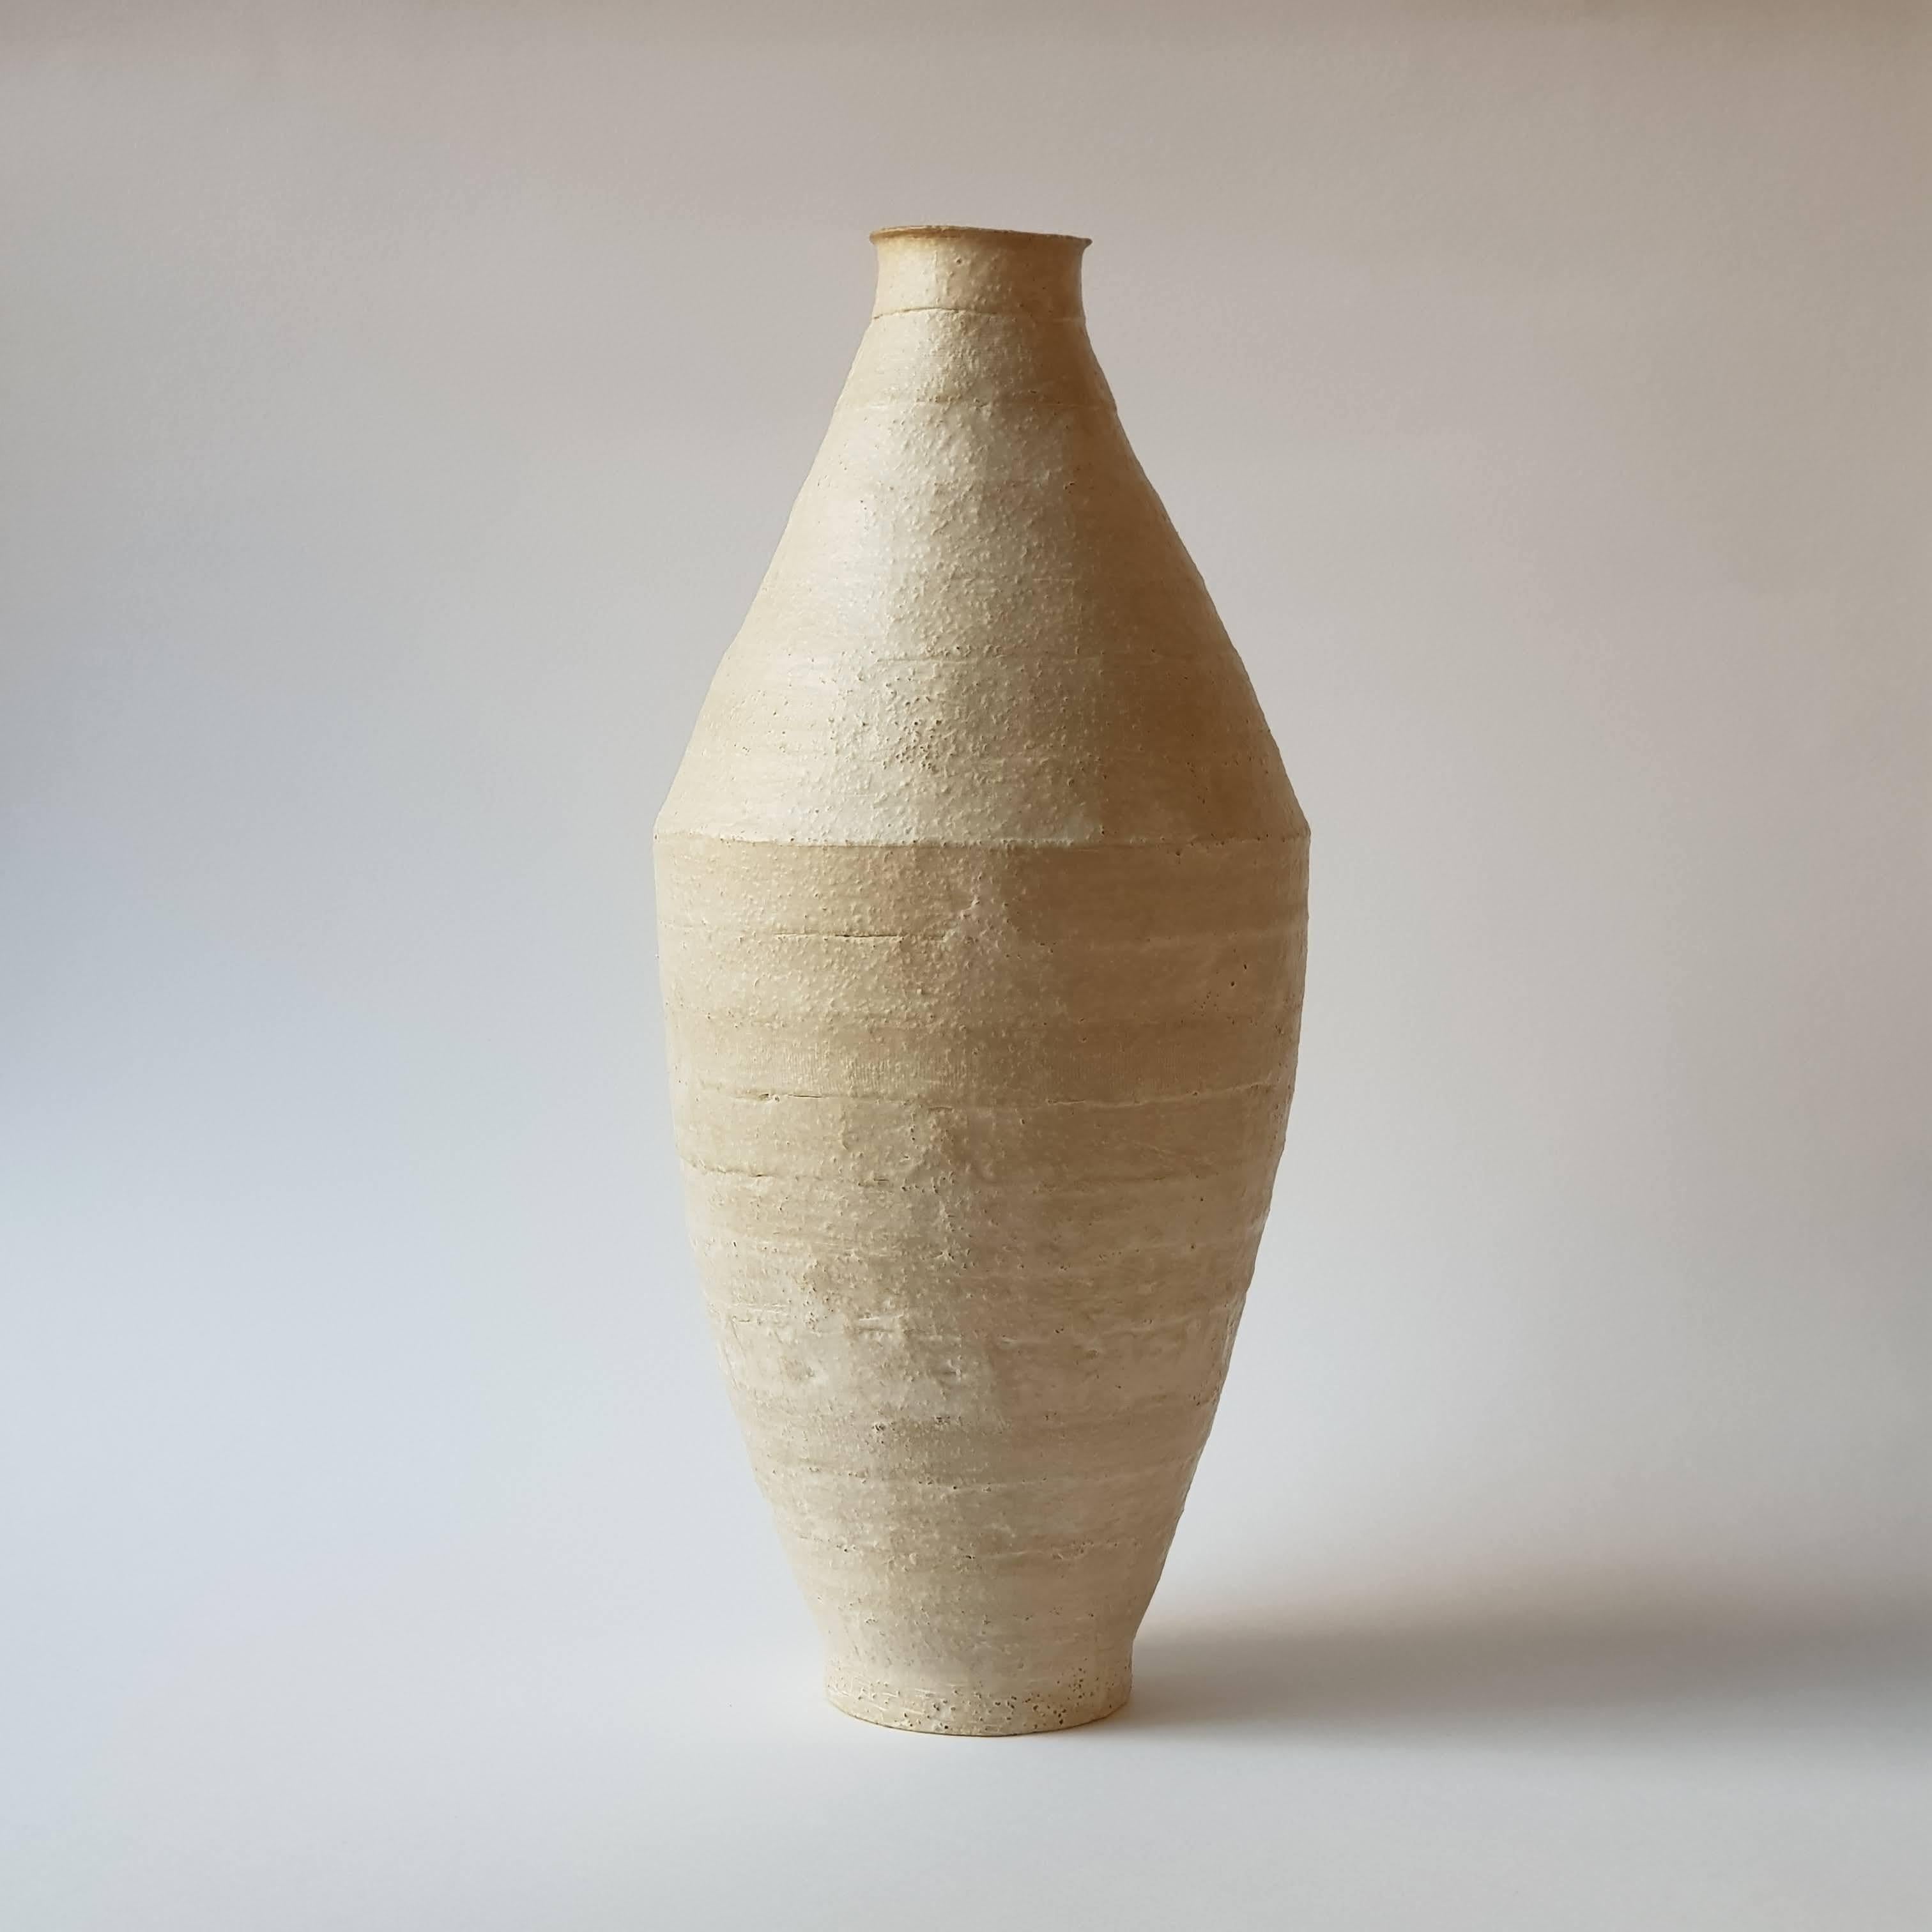 Beige Stoneware Amphora Vase by Elena Vasilantonaki
Unique
Dimensions: ⌀ 16 x H 36 cm (Dimensions may vary)
Materials: Stoneware
Available finishes: Black, Beige, Brown, Red, Terracotta, White Patina

Growing up in Greece I was surrounded by pottery